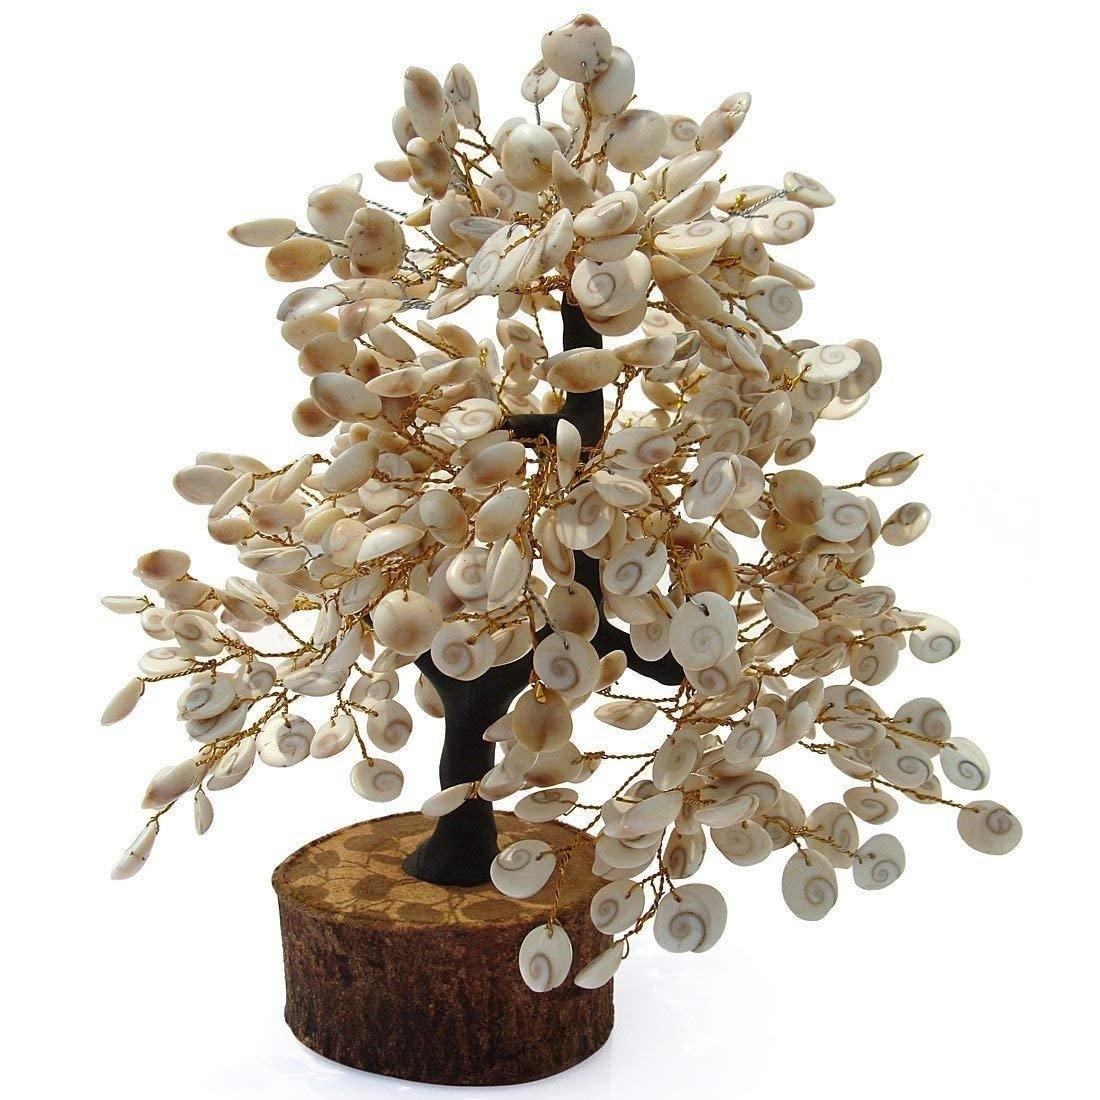 Gomati Chakra Tree (500 chakras) (THIS PRODUCT AVAILABLE ONLY